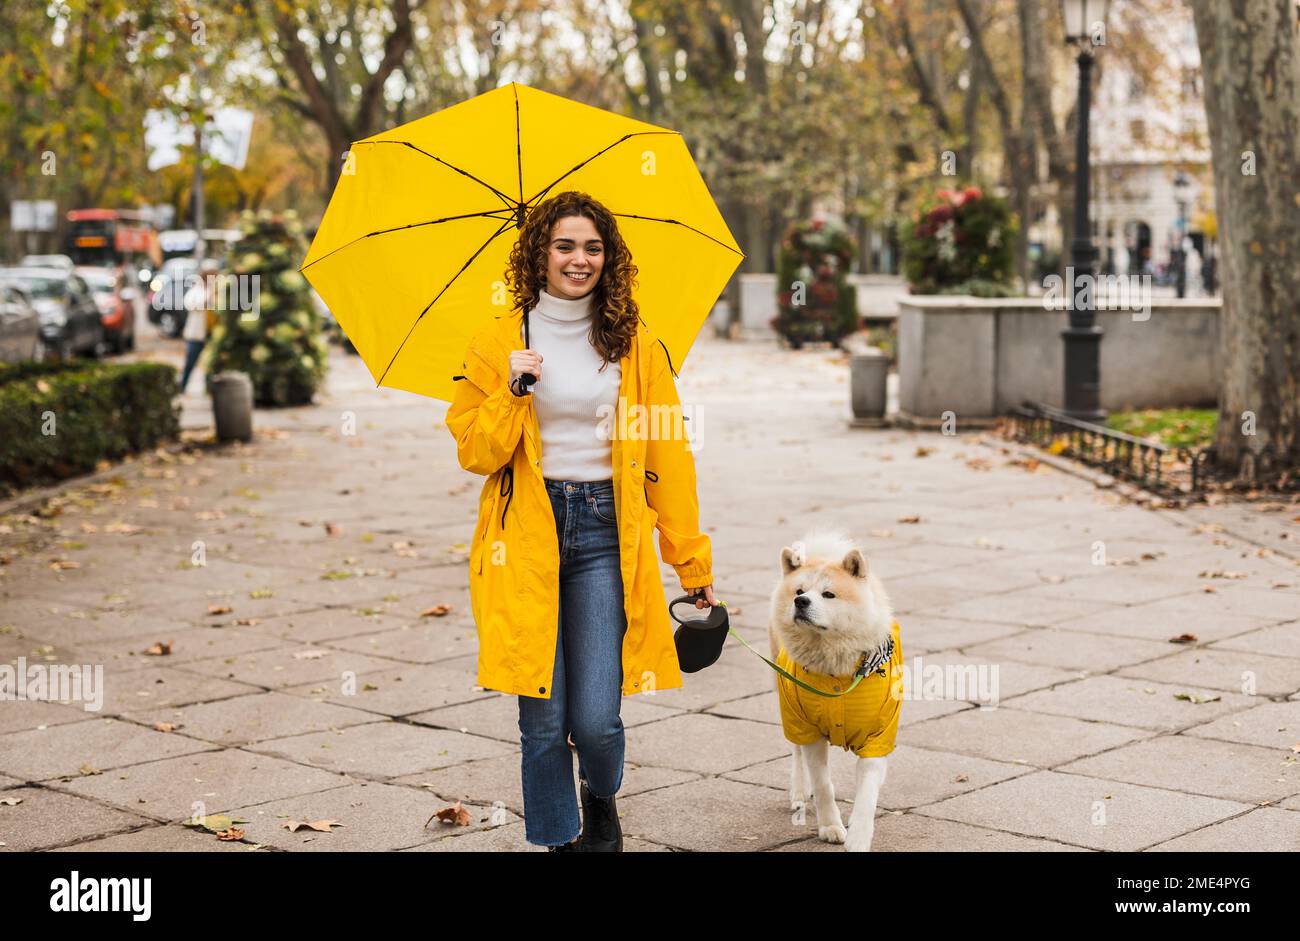 Happy woman holding yellow umbrella and walking with dog at footpath Stock Photo